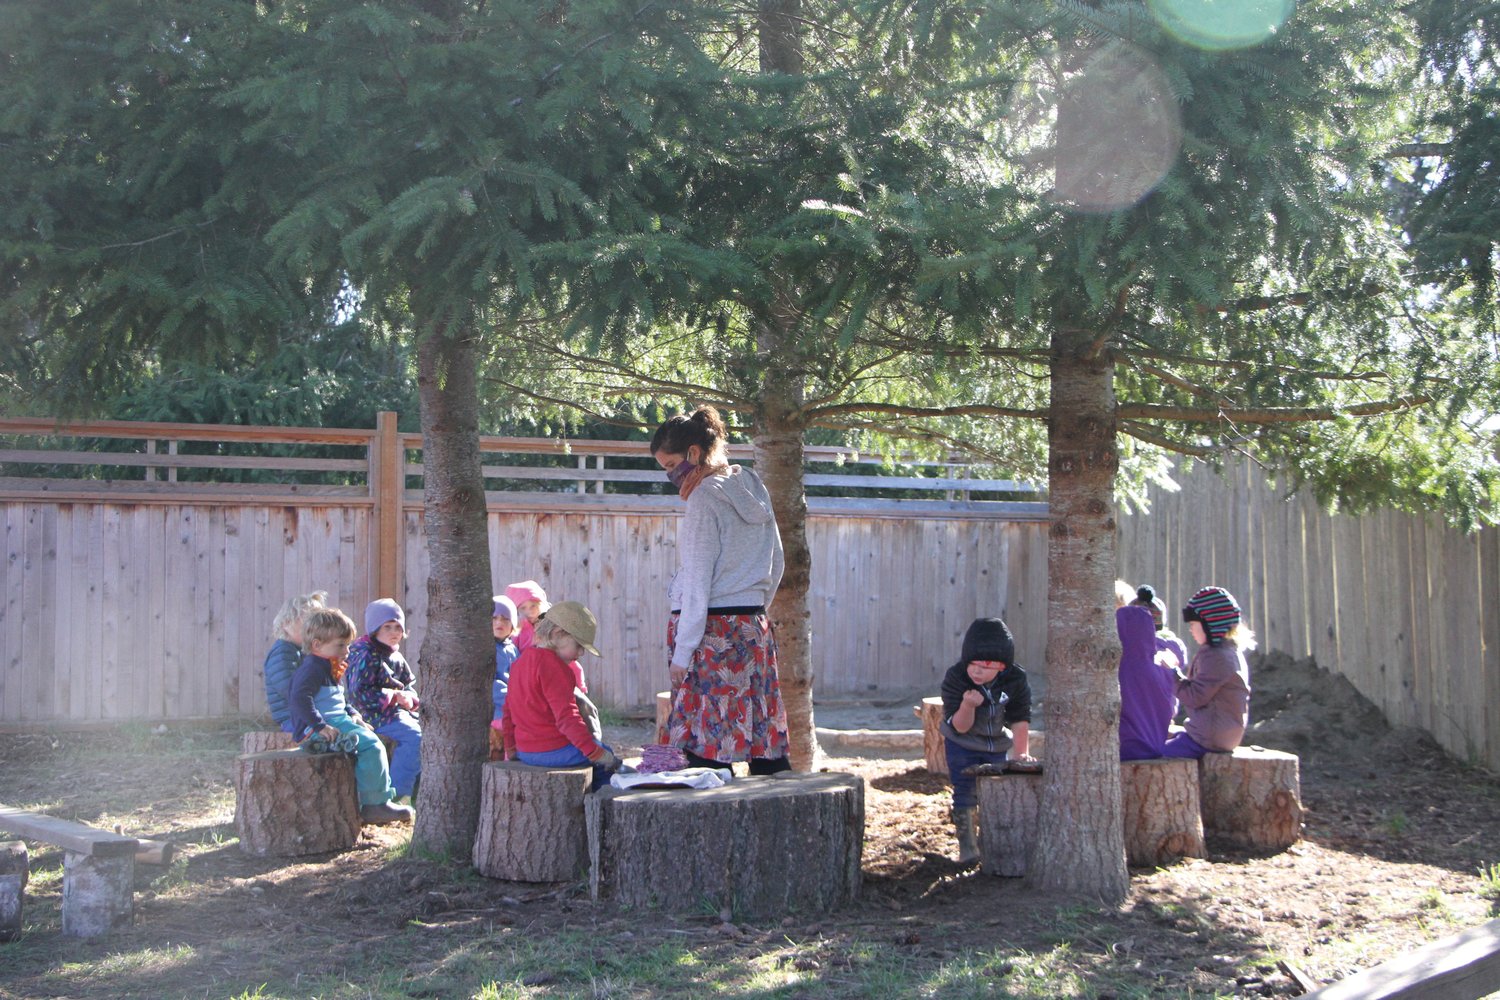 Sunfield teachers have creatively harnessed the environment through the use of outdoor classrooms.